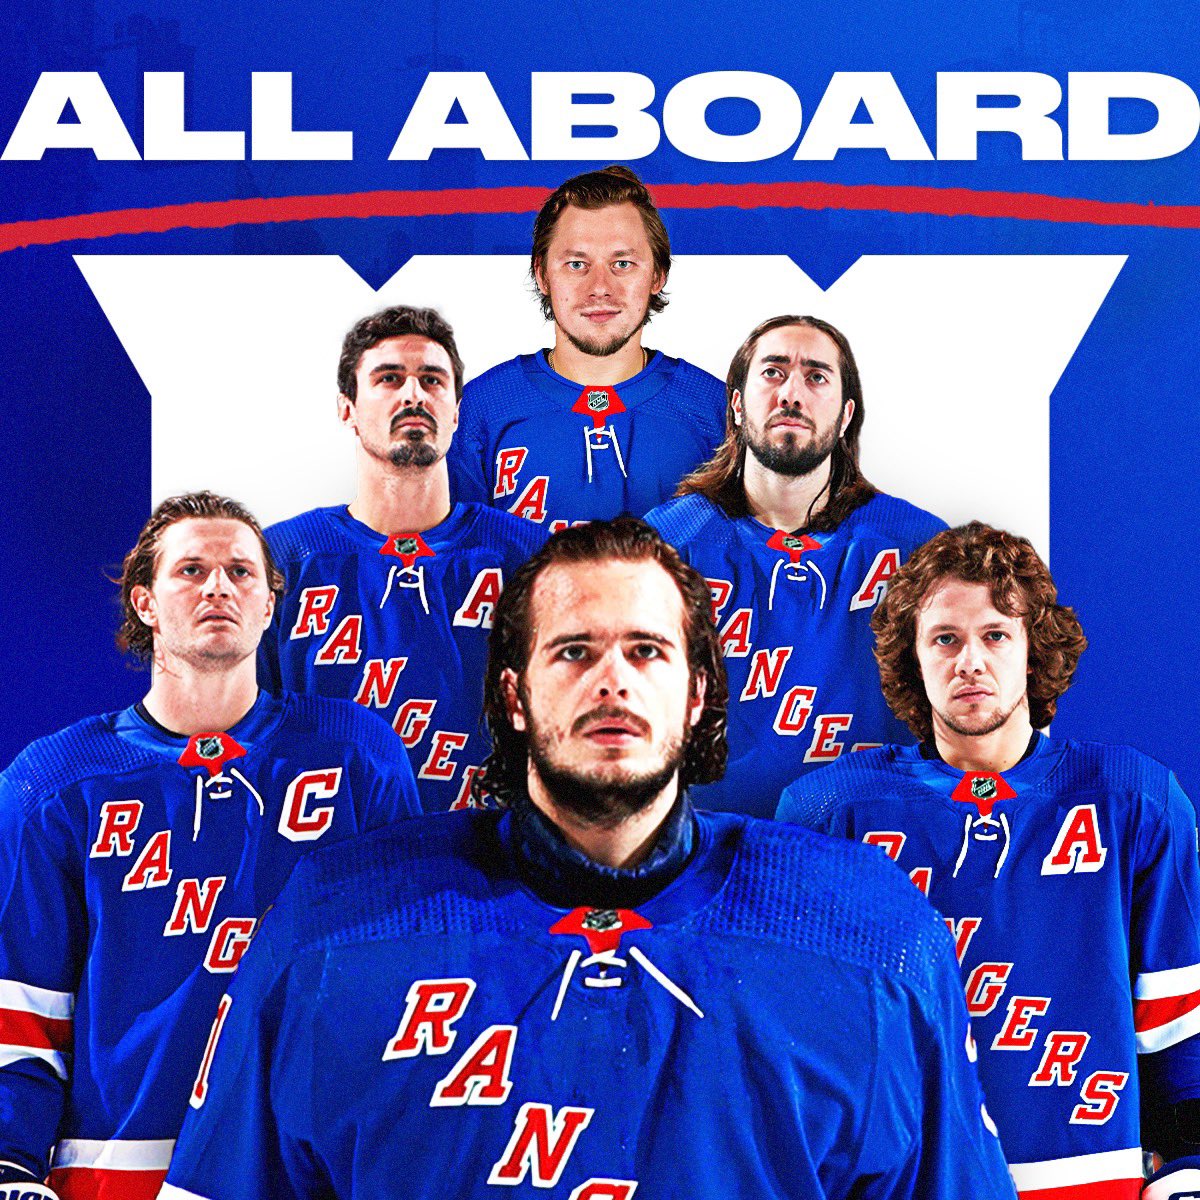 New York Rangers - Roster. Is. In.